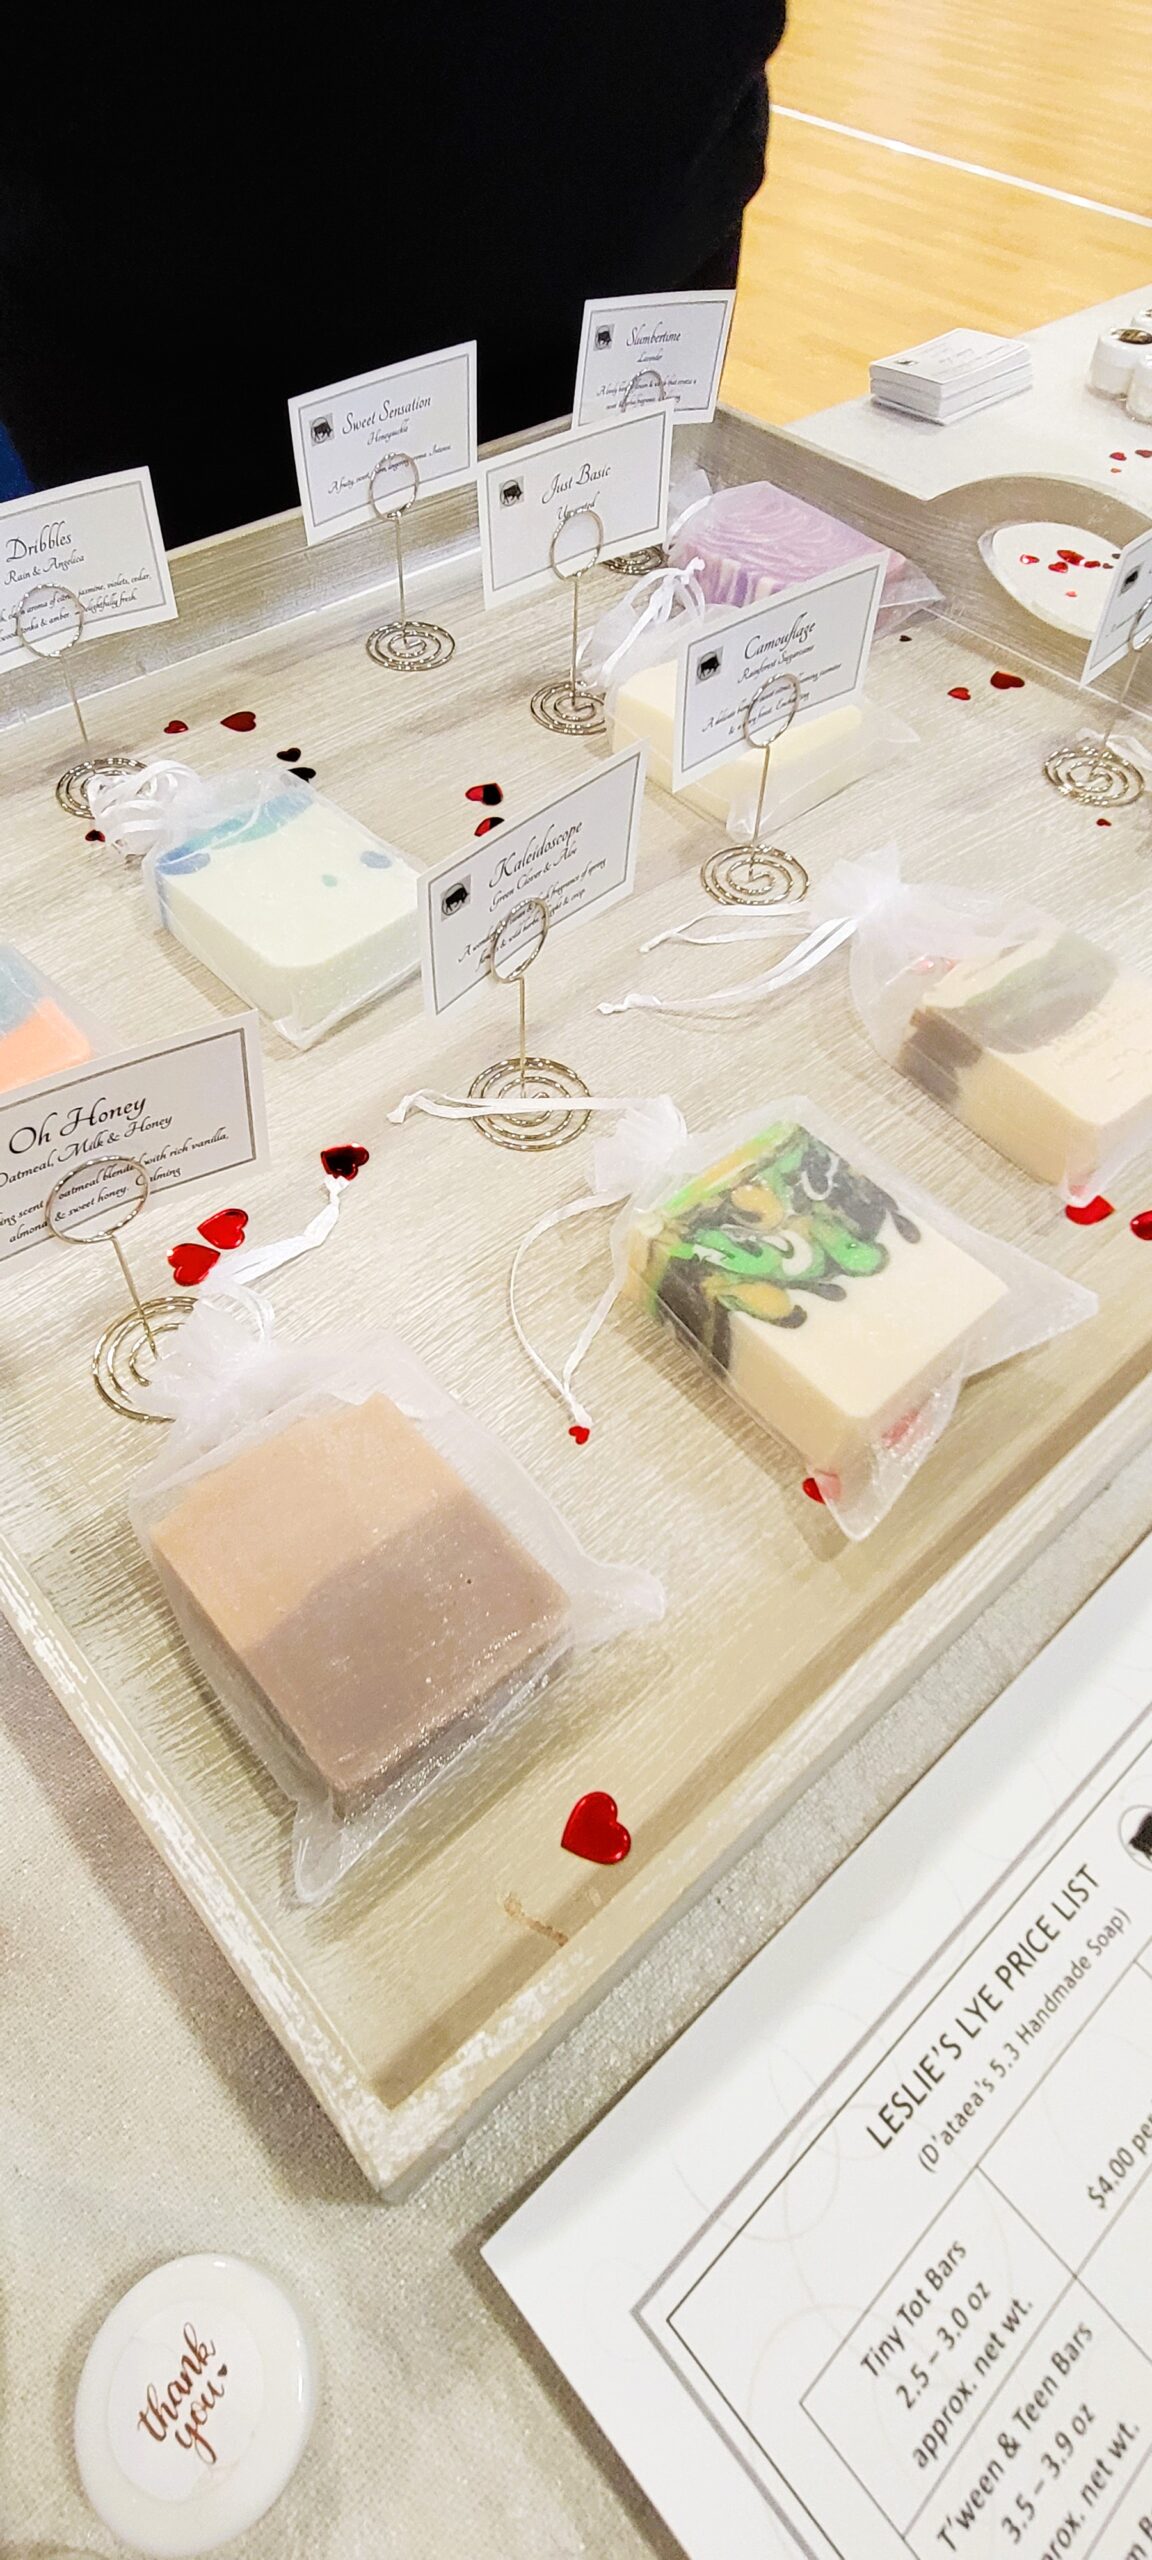 A tray of soaps on a table.